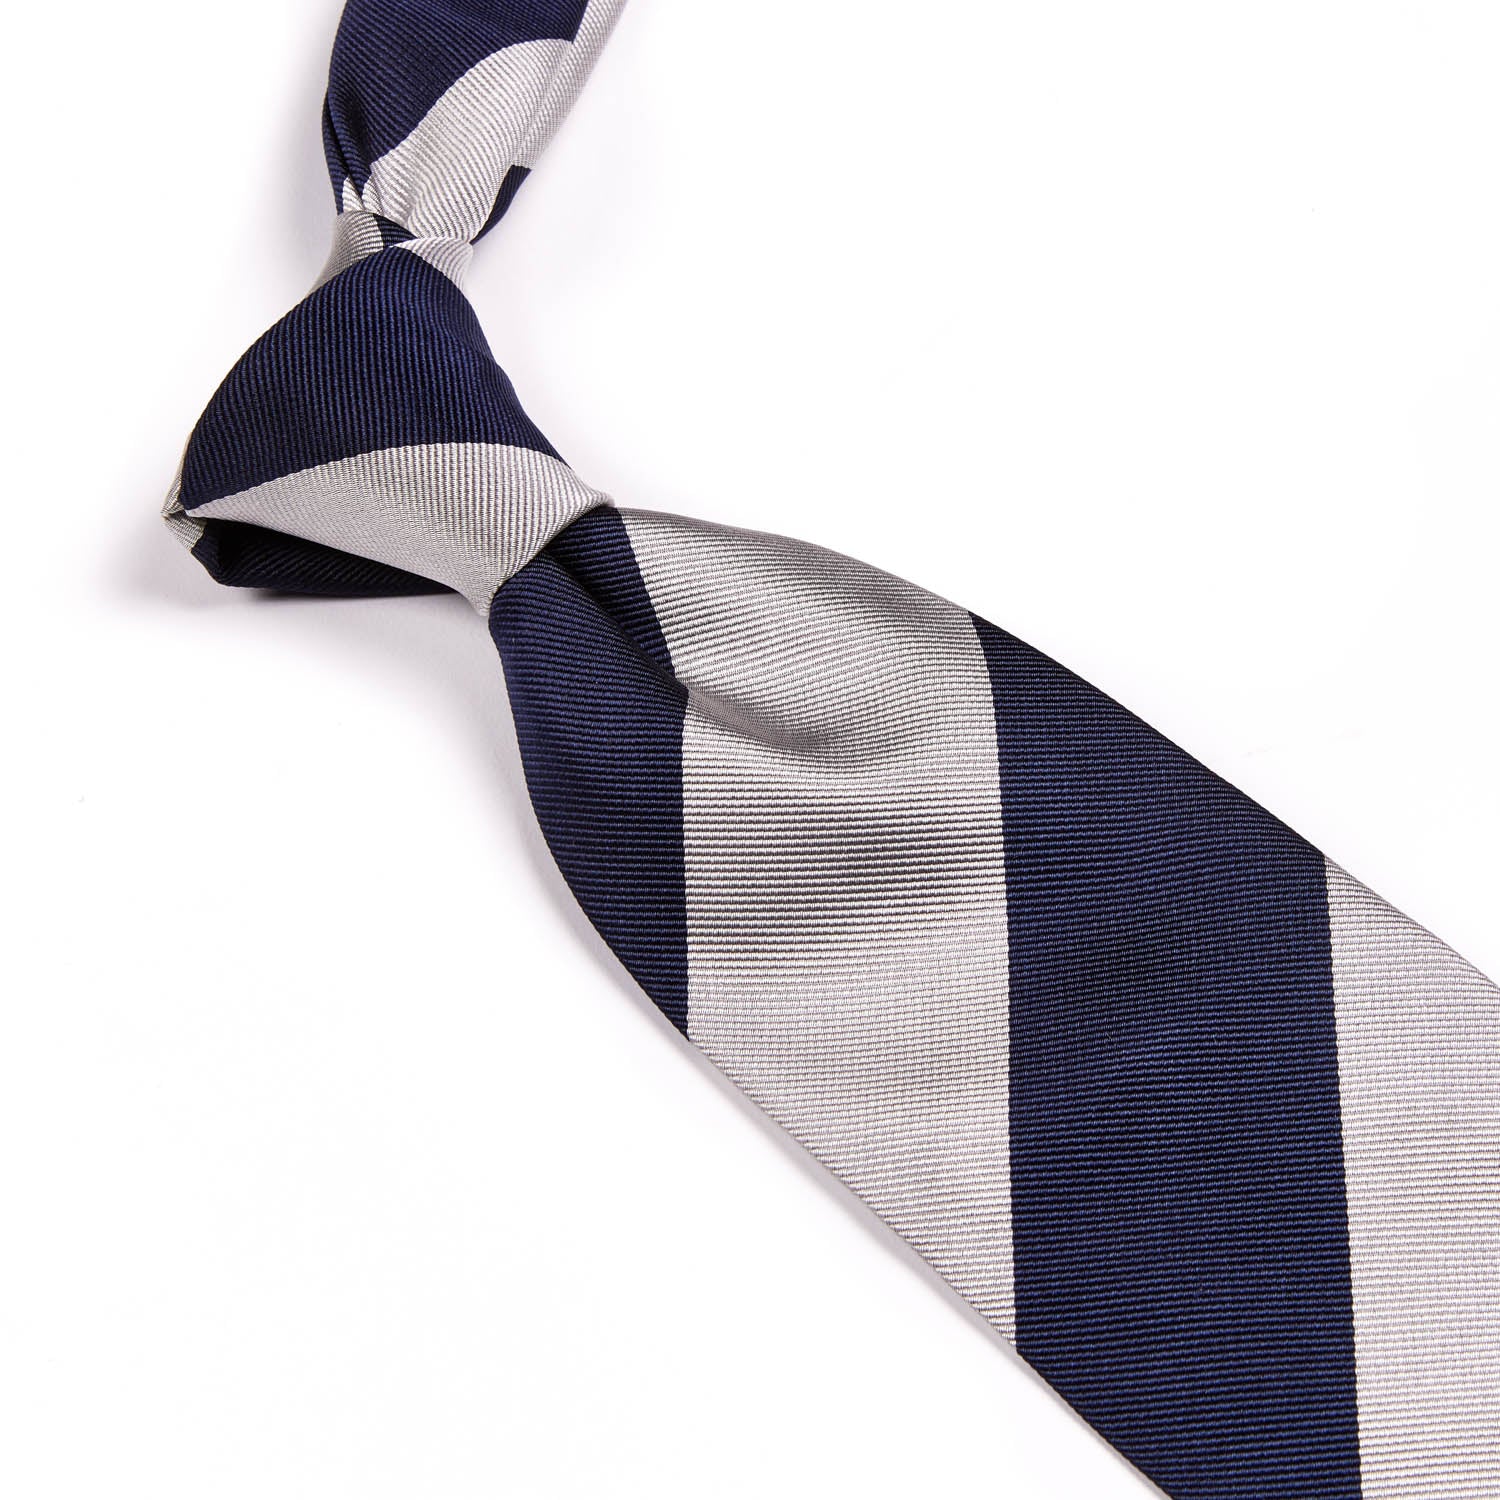 A Sovereign Grade Navy Wide Rep Tie, 150 cm inspired by United Kingdom, on a white background and handcrafted by KirbyAllison.com.